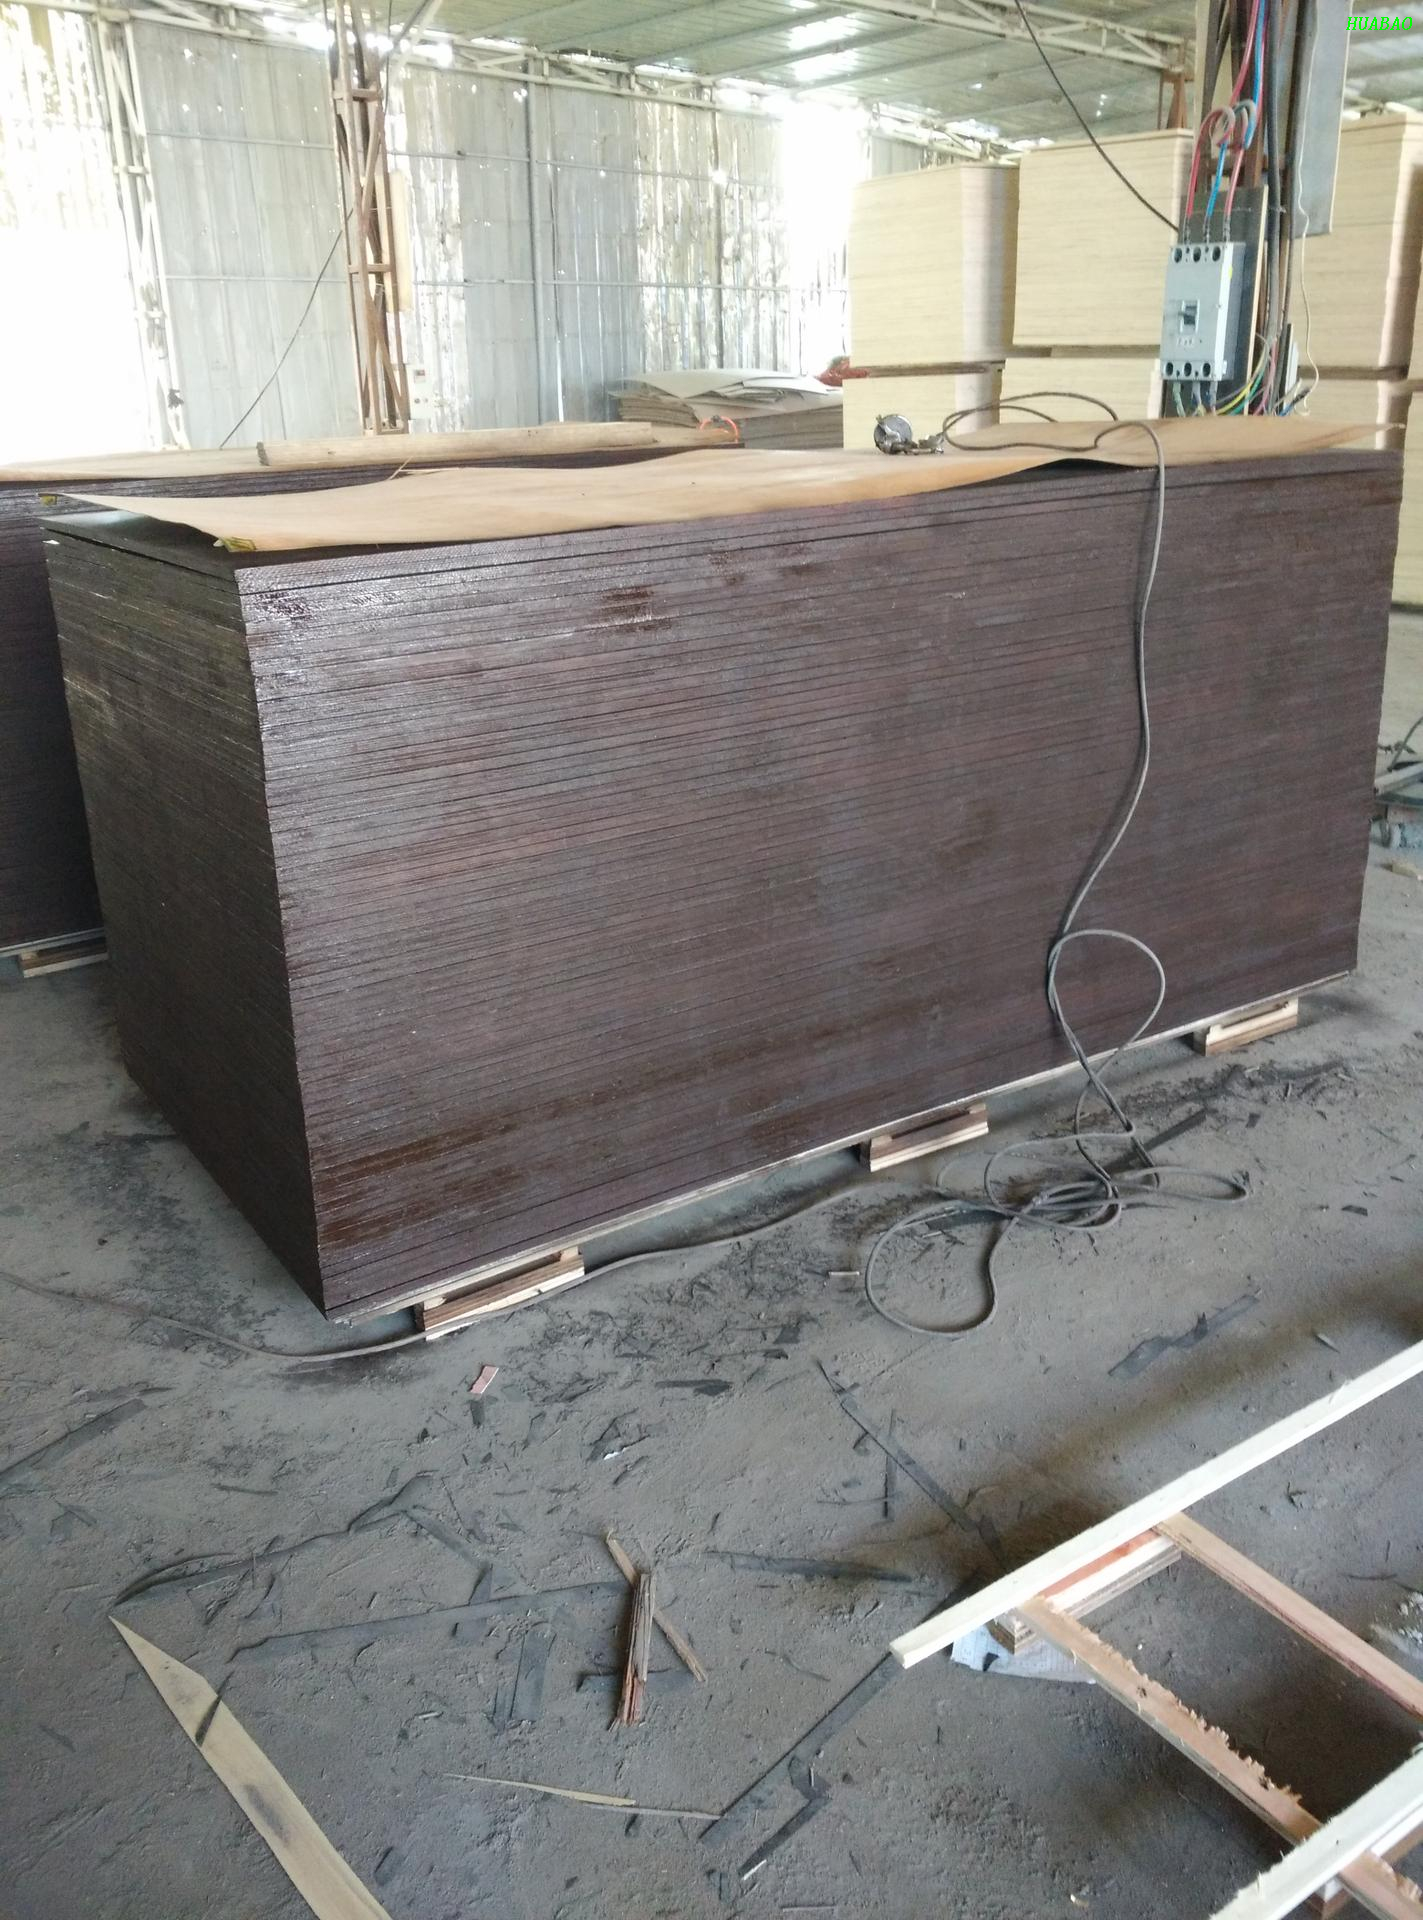 Poplar Core Construction Plywood with Coc/Pvoc Certificate